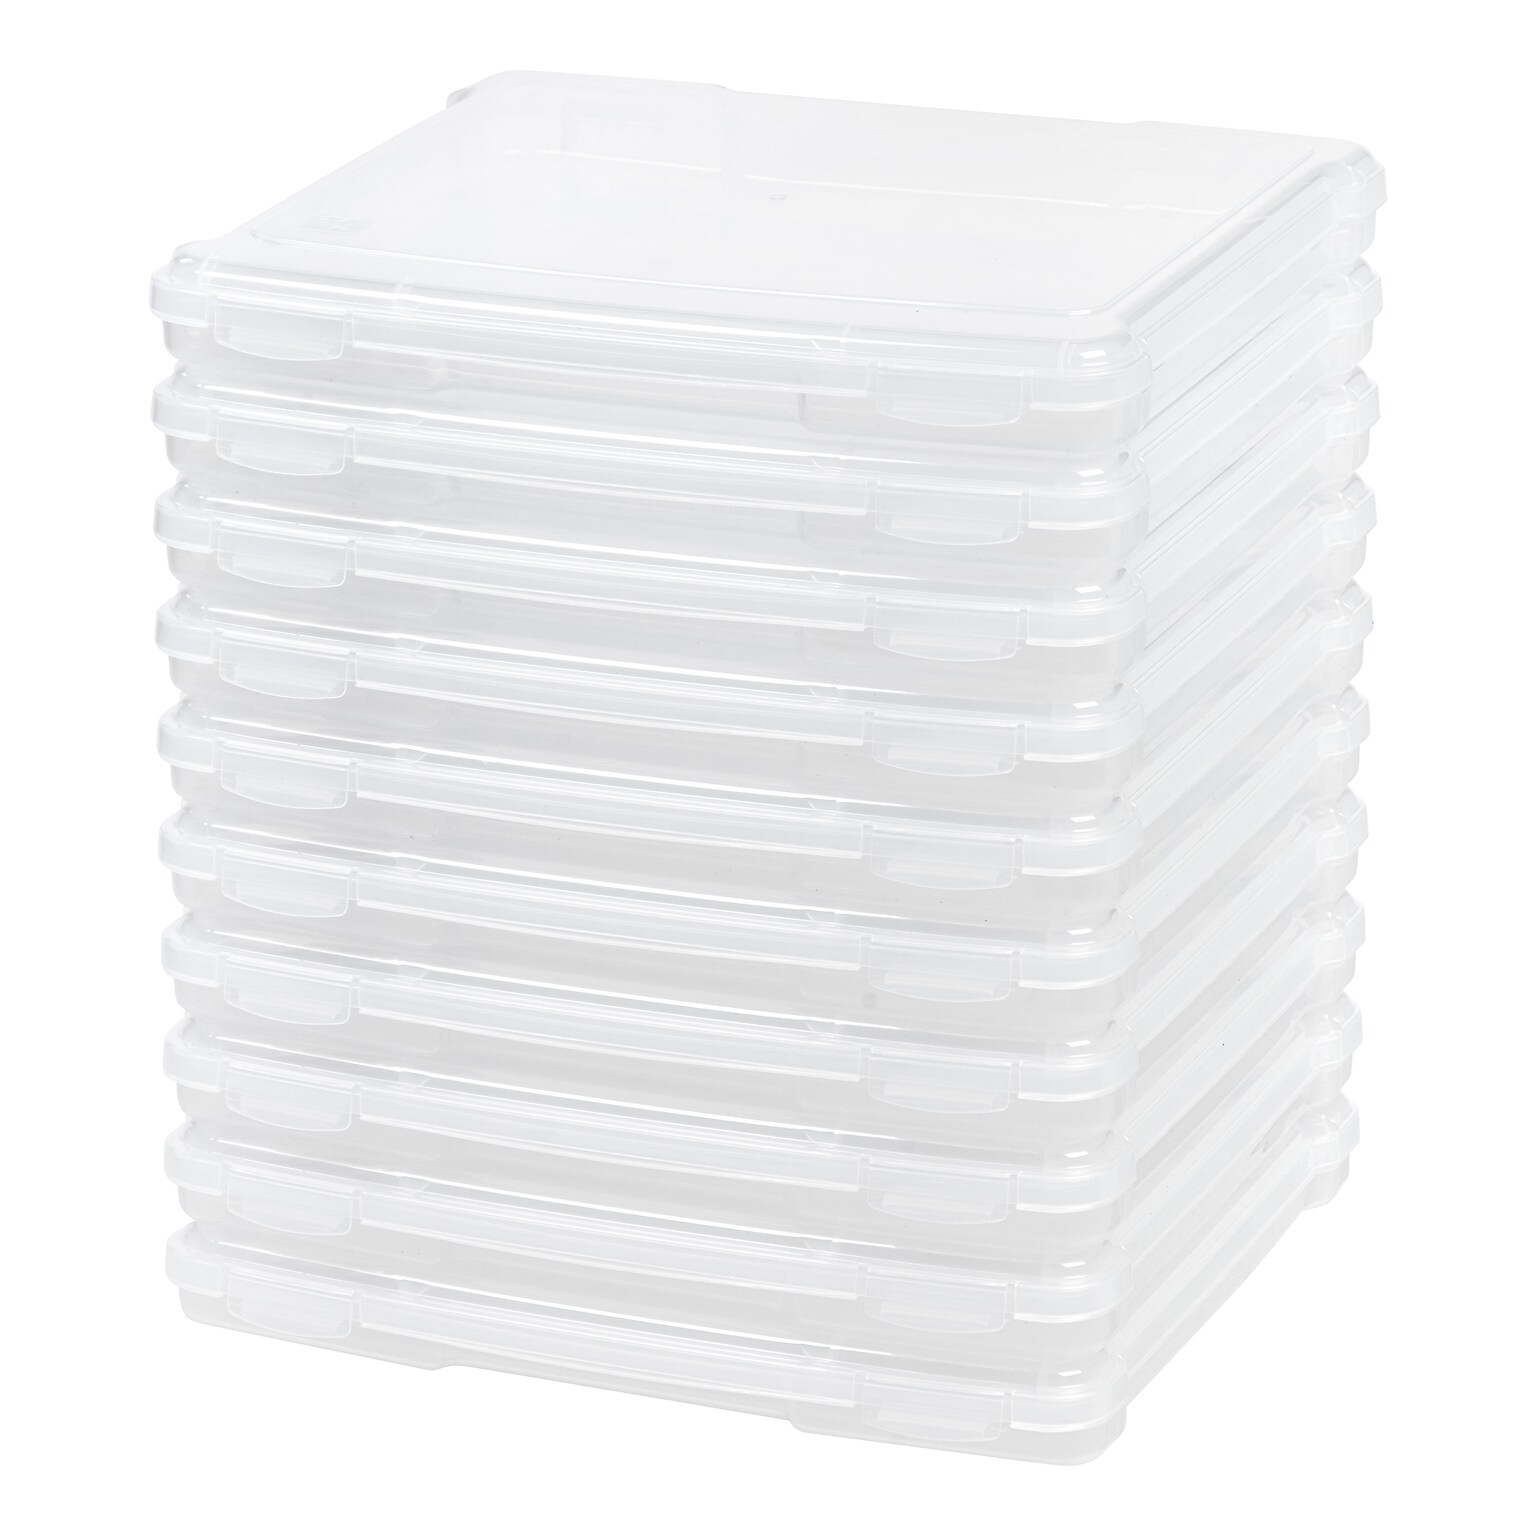 IRIS Portable Project Case, Clear, 10 Pack (586390)